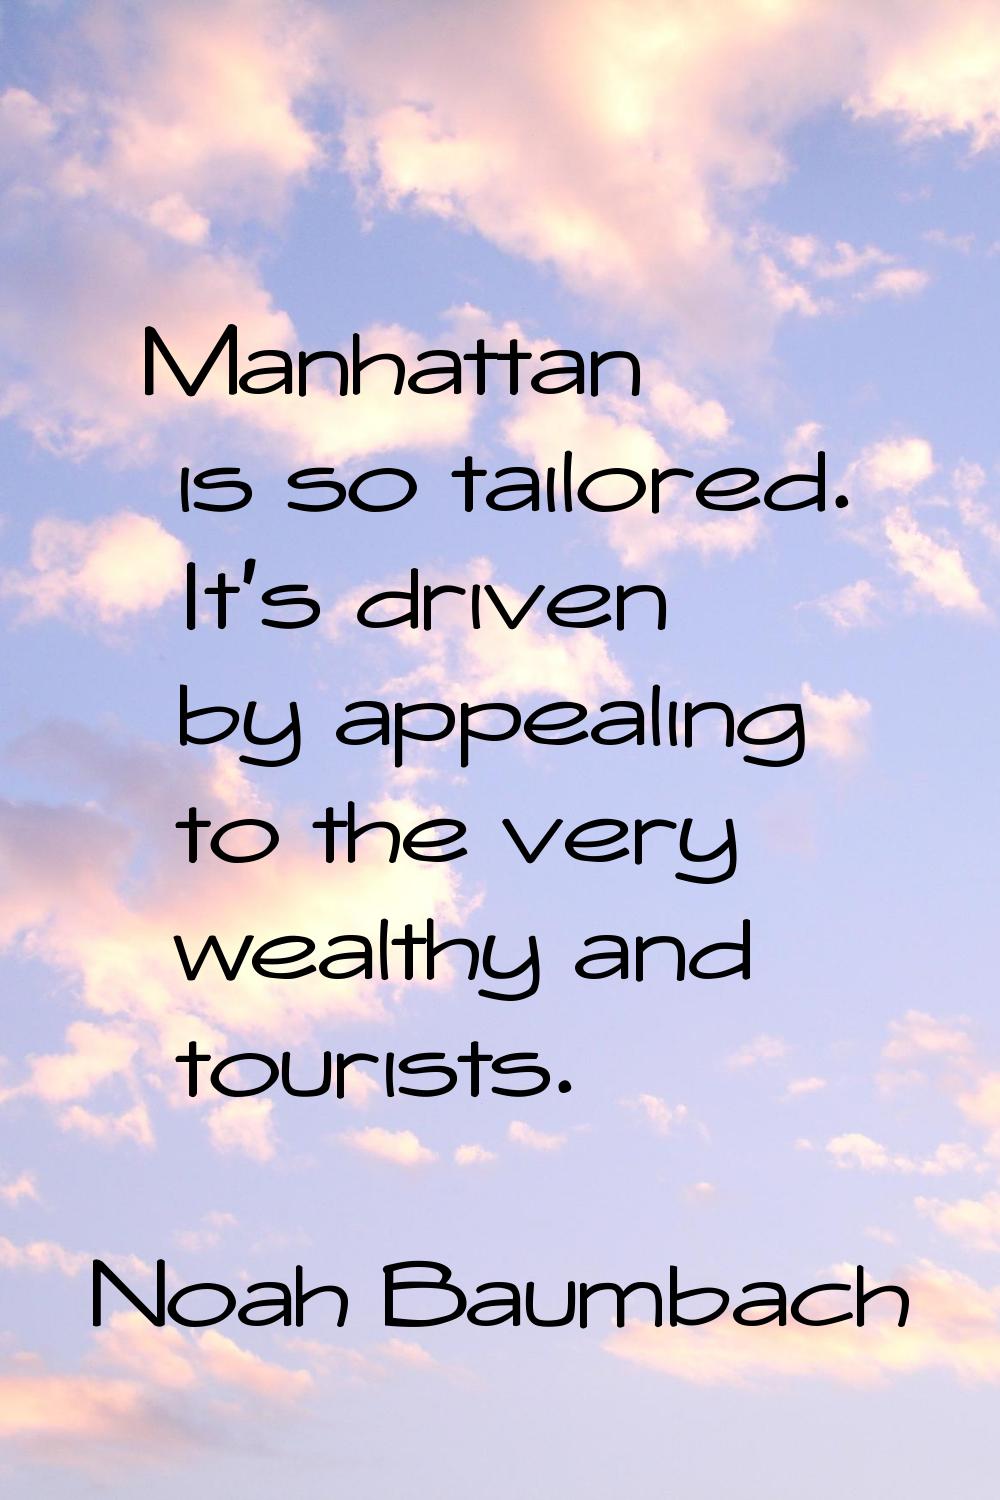 Manhattan is so tailored. It's driven by appealing to the very wealthy and tourists.